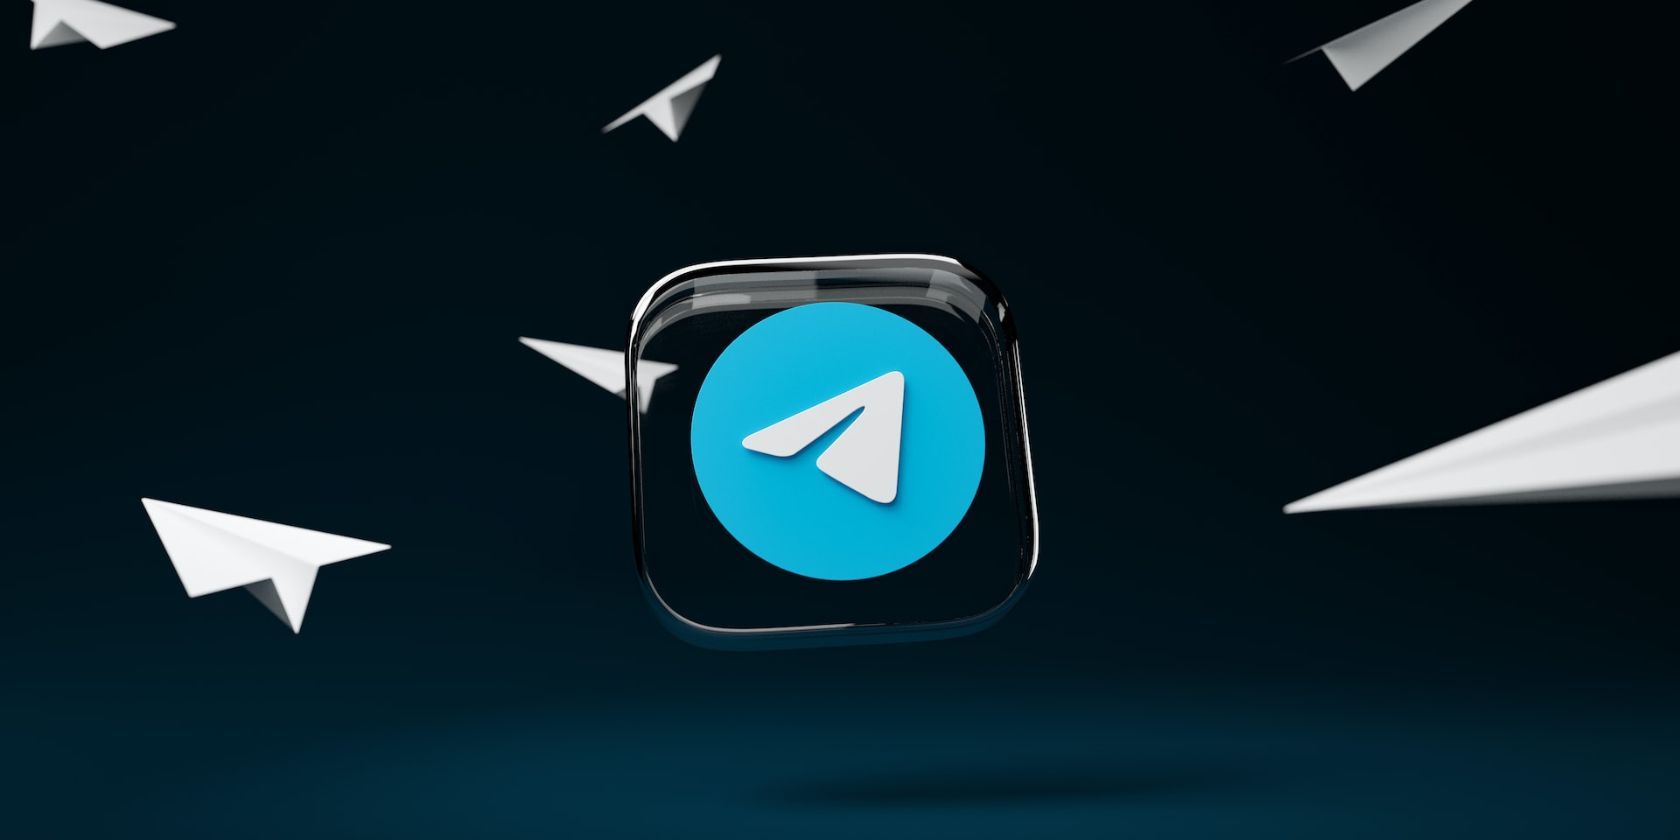 How to Find People on Telegram?